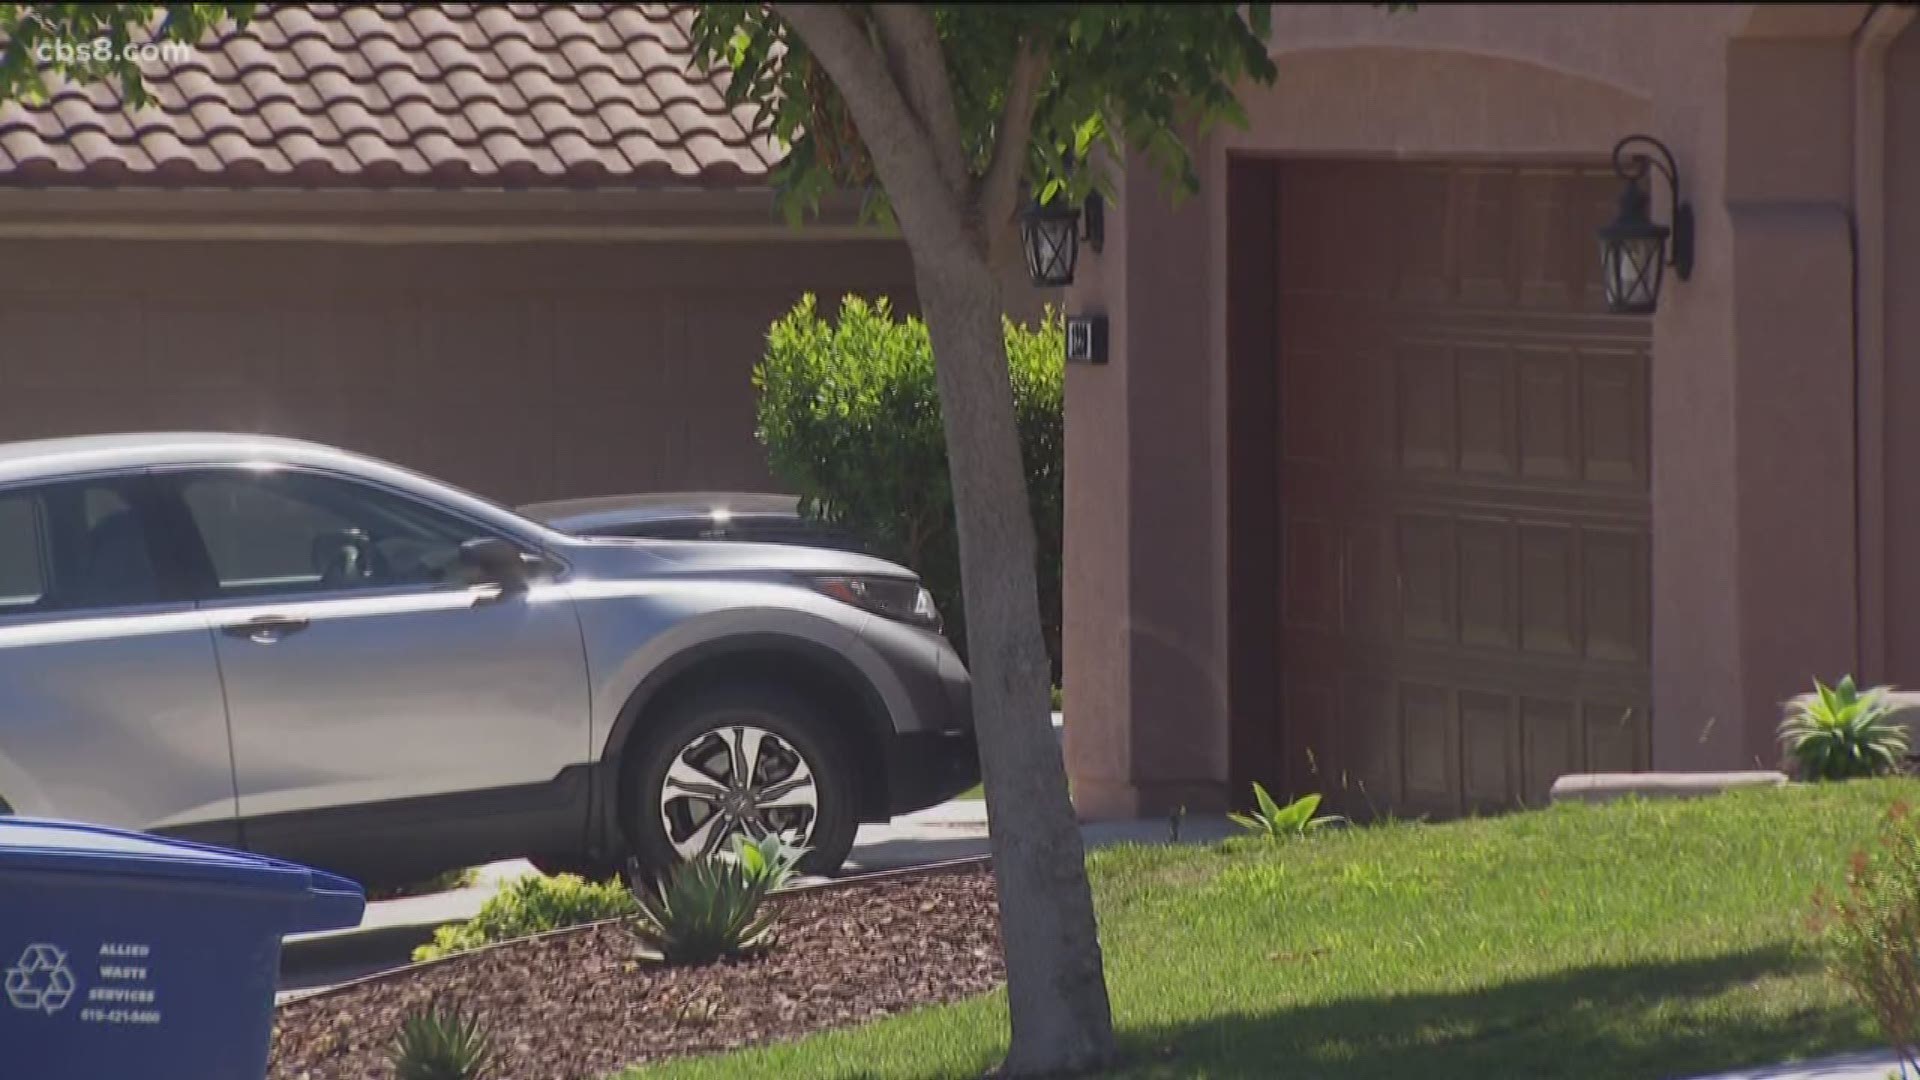 “Park in the garage, or else”: That is the message from a homeowner’s association to some Chula Vista residents, but many homeowners in Eastlake Trails are bristling under the restrictions on outdoor parking.